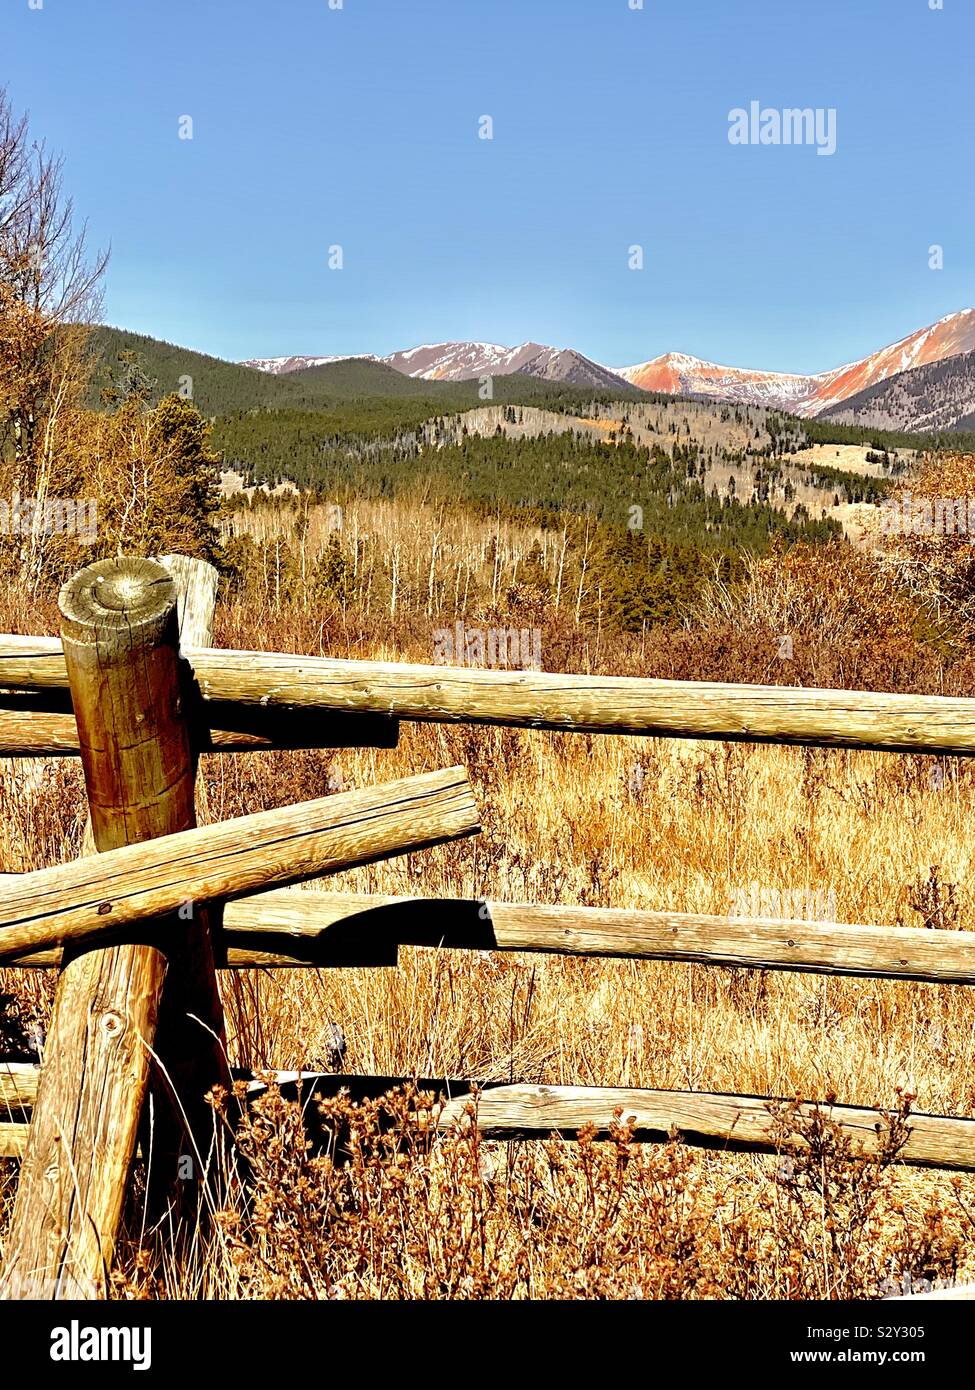 Rail fence and scenic mountains in Colorado Stock Photo